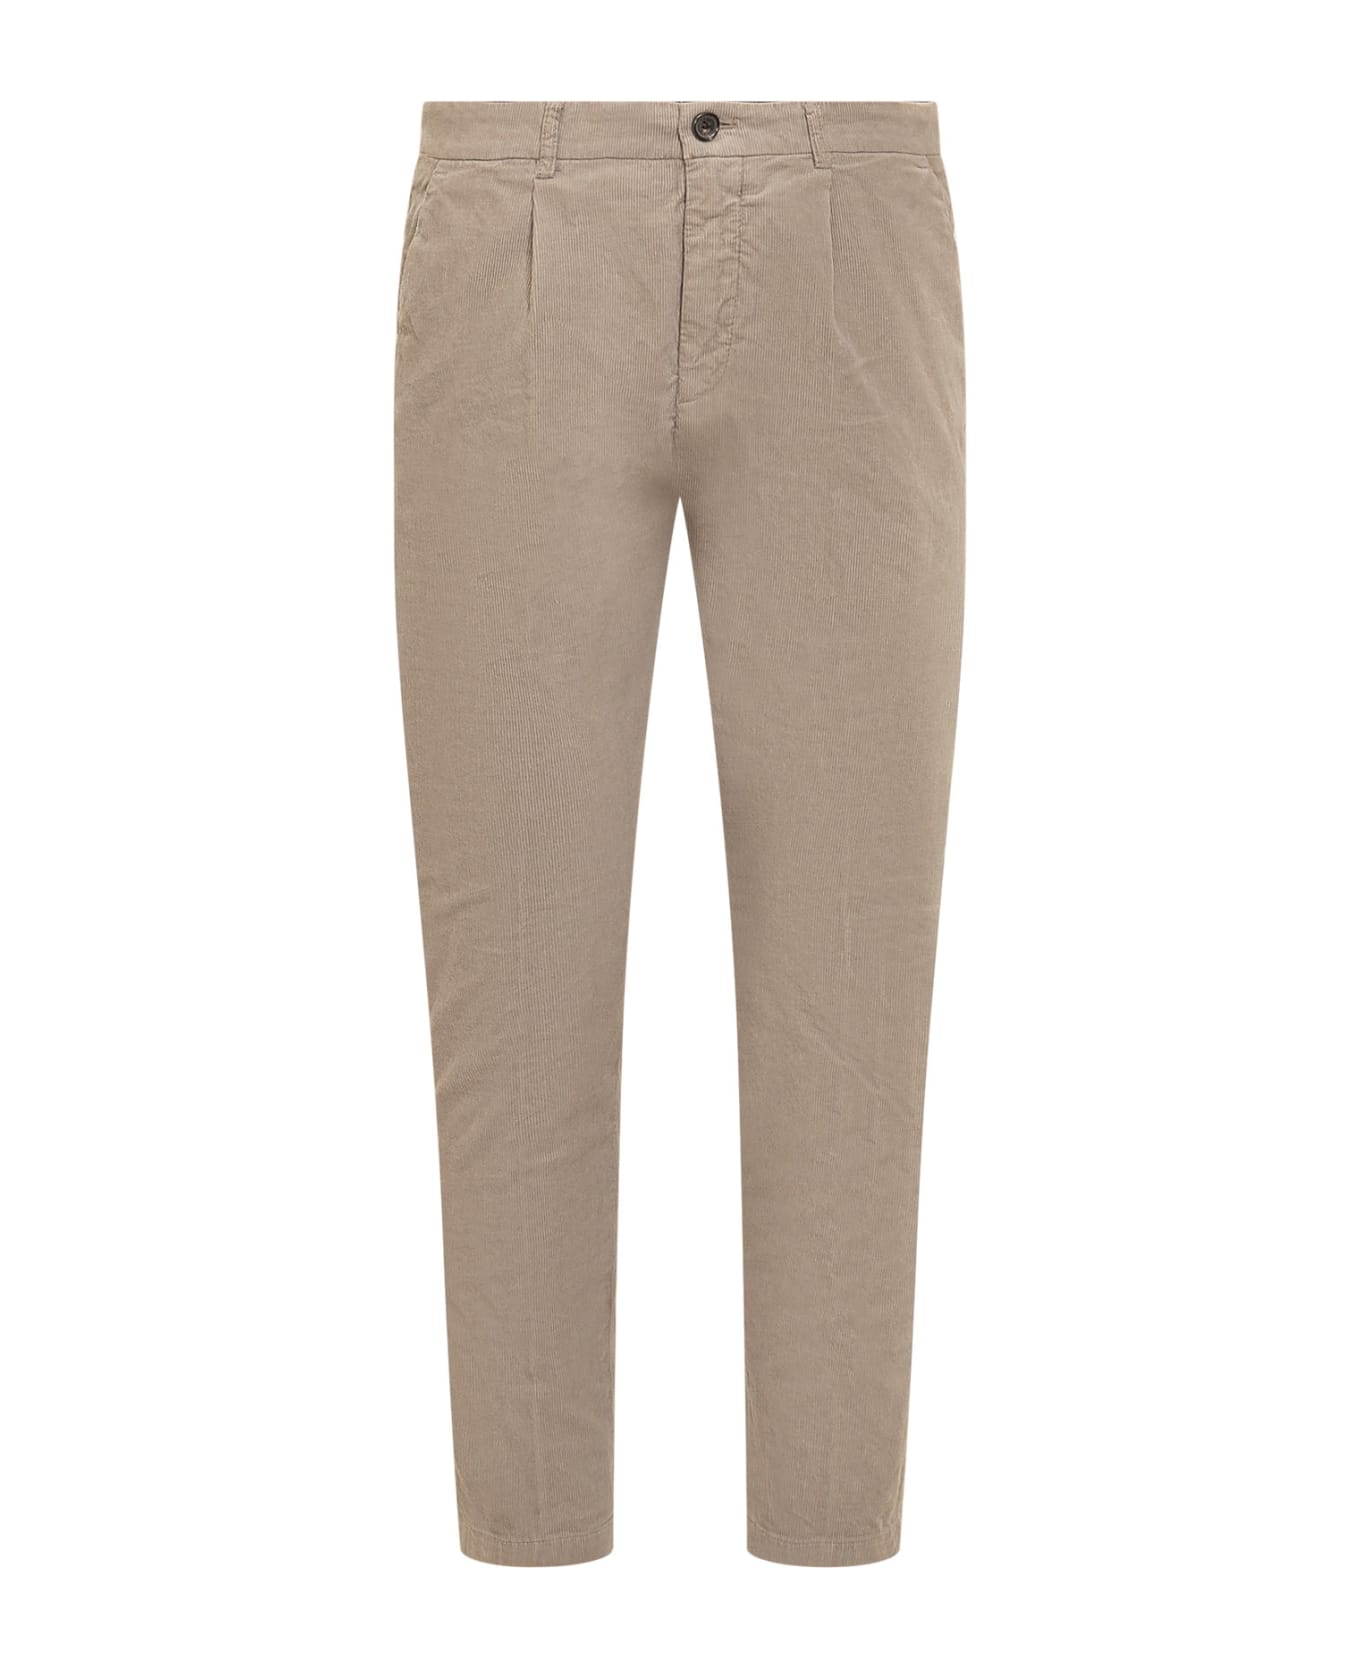 Department Five Prince Trousers Chinos - SAND